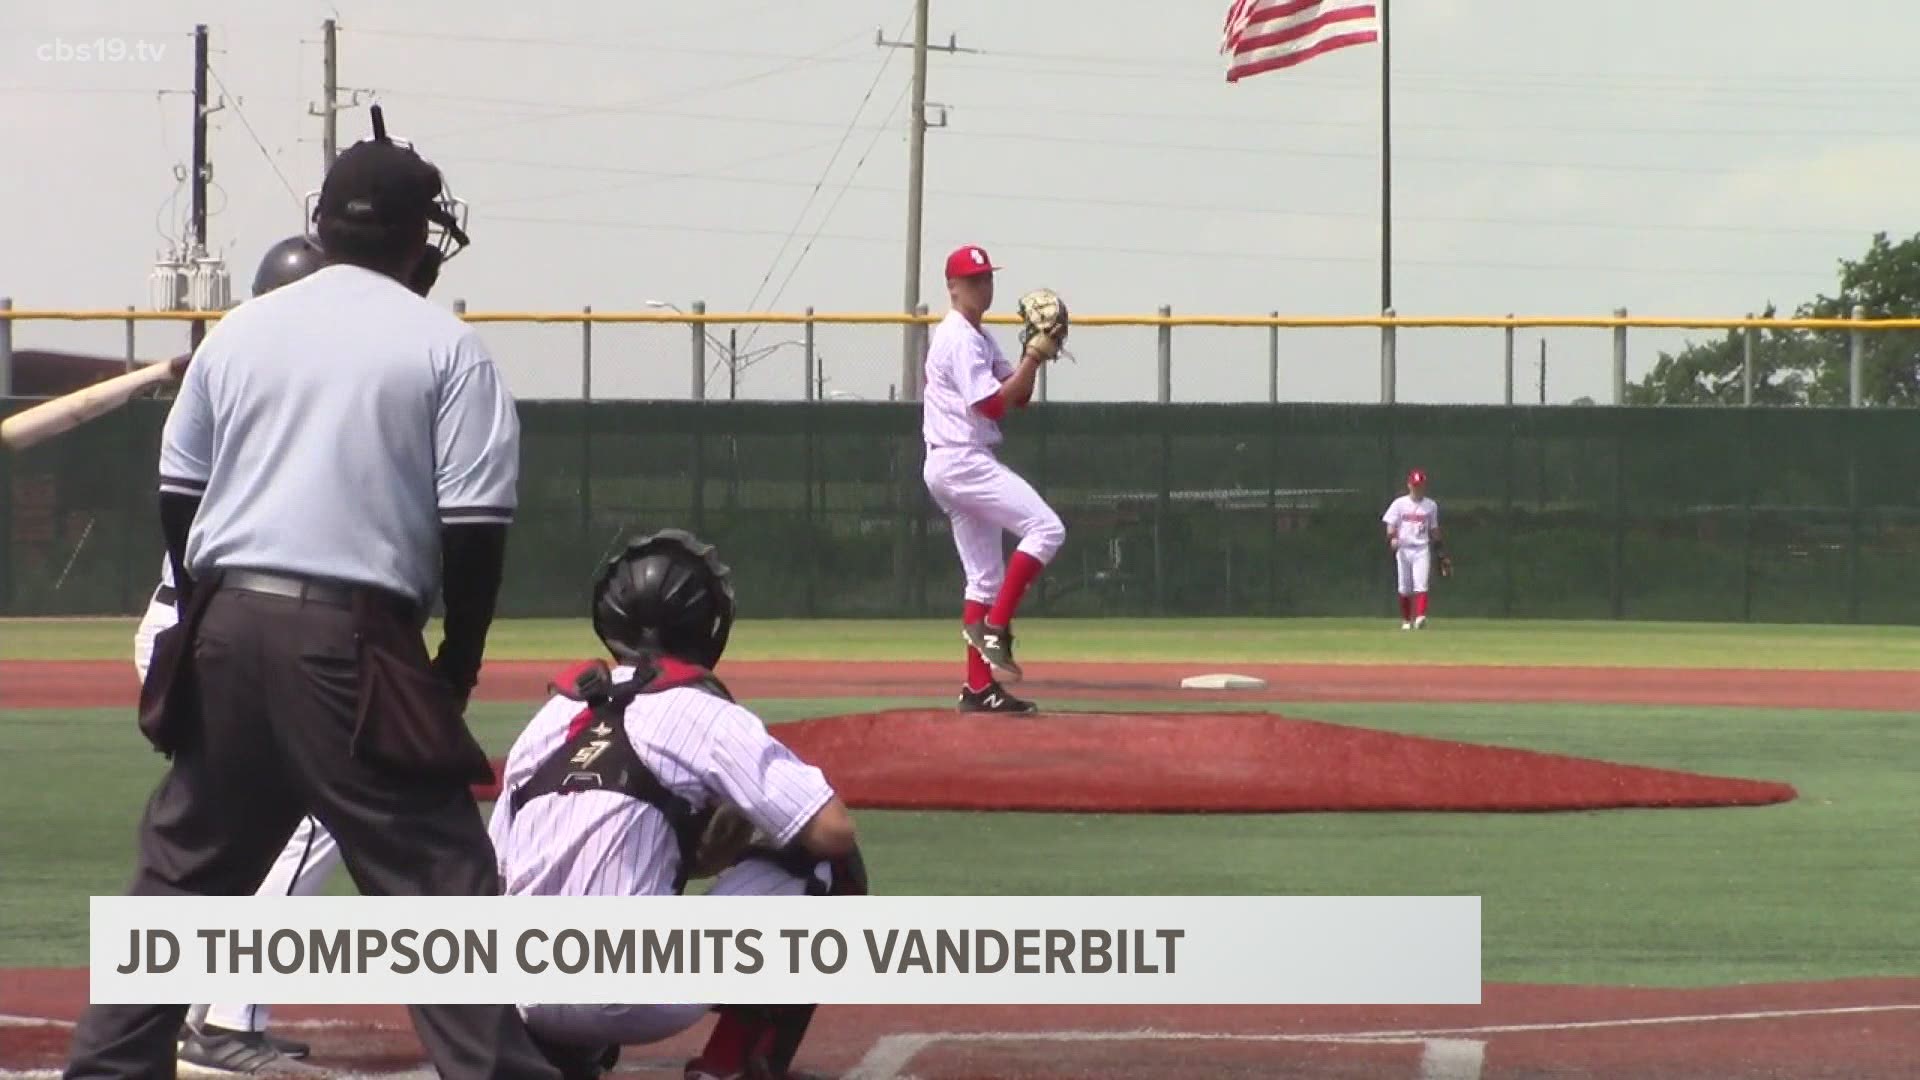 The big lefty is one of the best arms in all of East Texas and he's taking his talents to the music city of Nashville to pitch for Vanderbilt University.